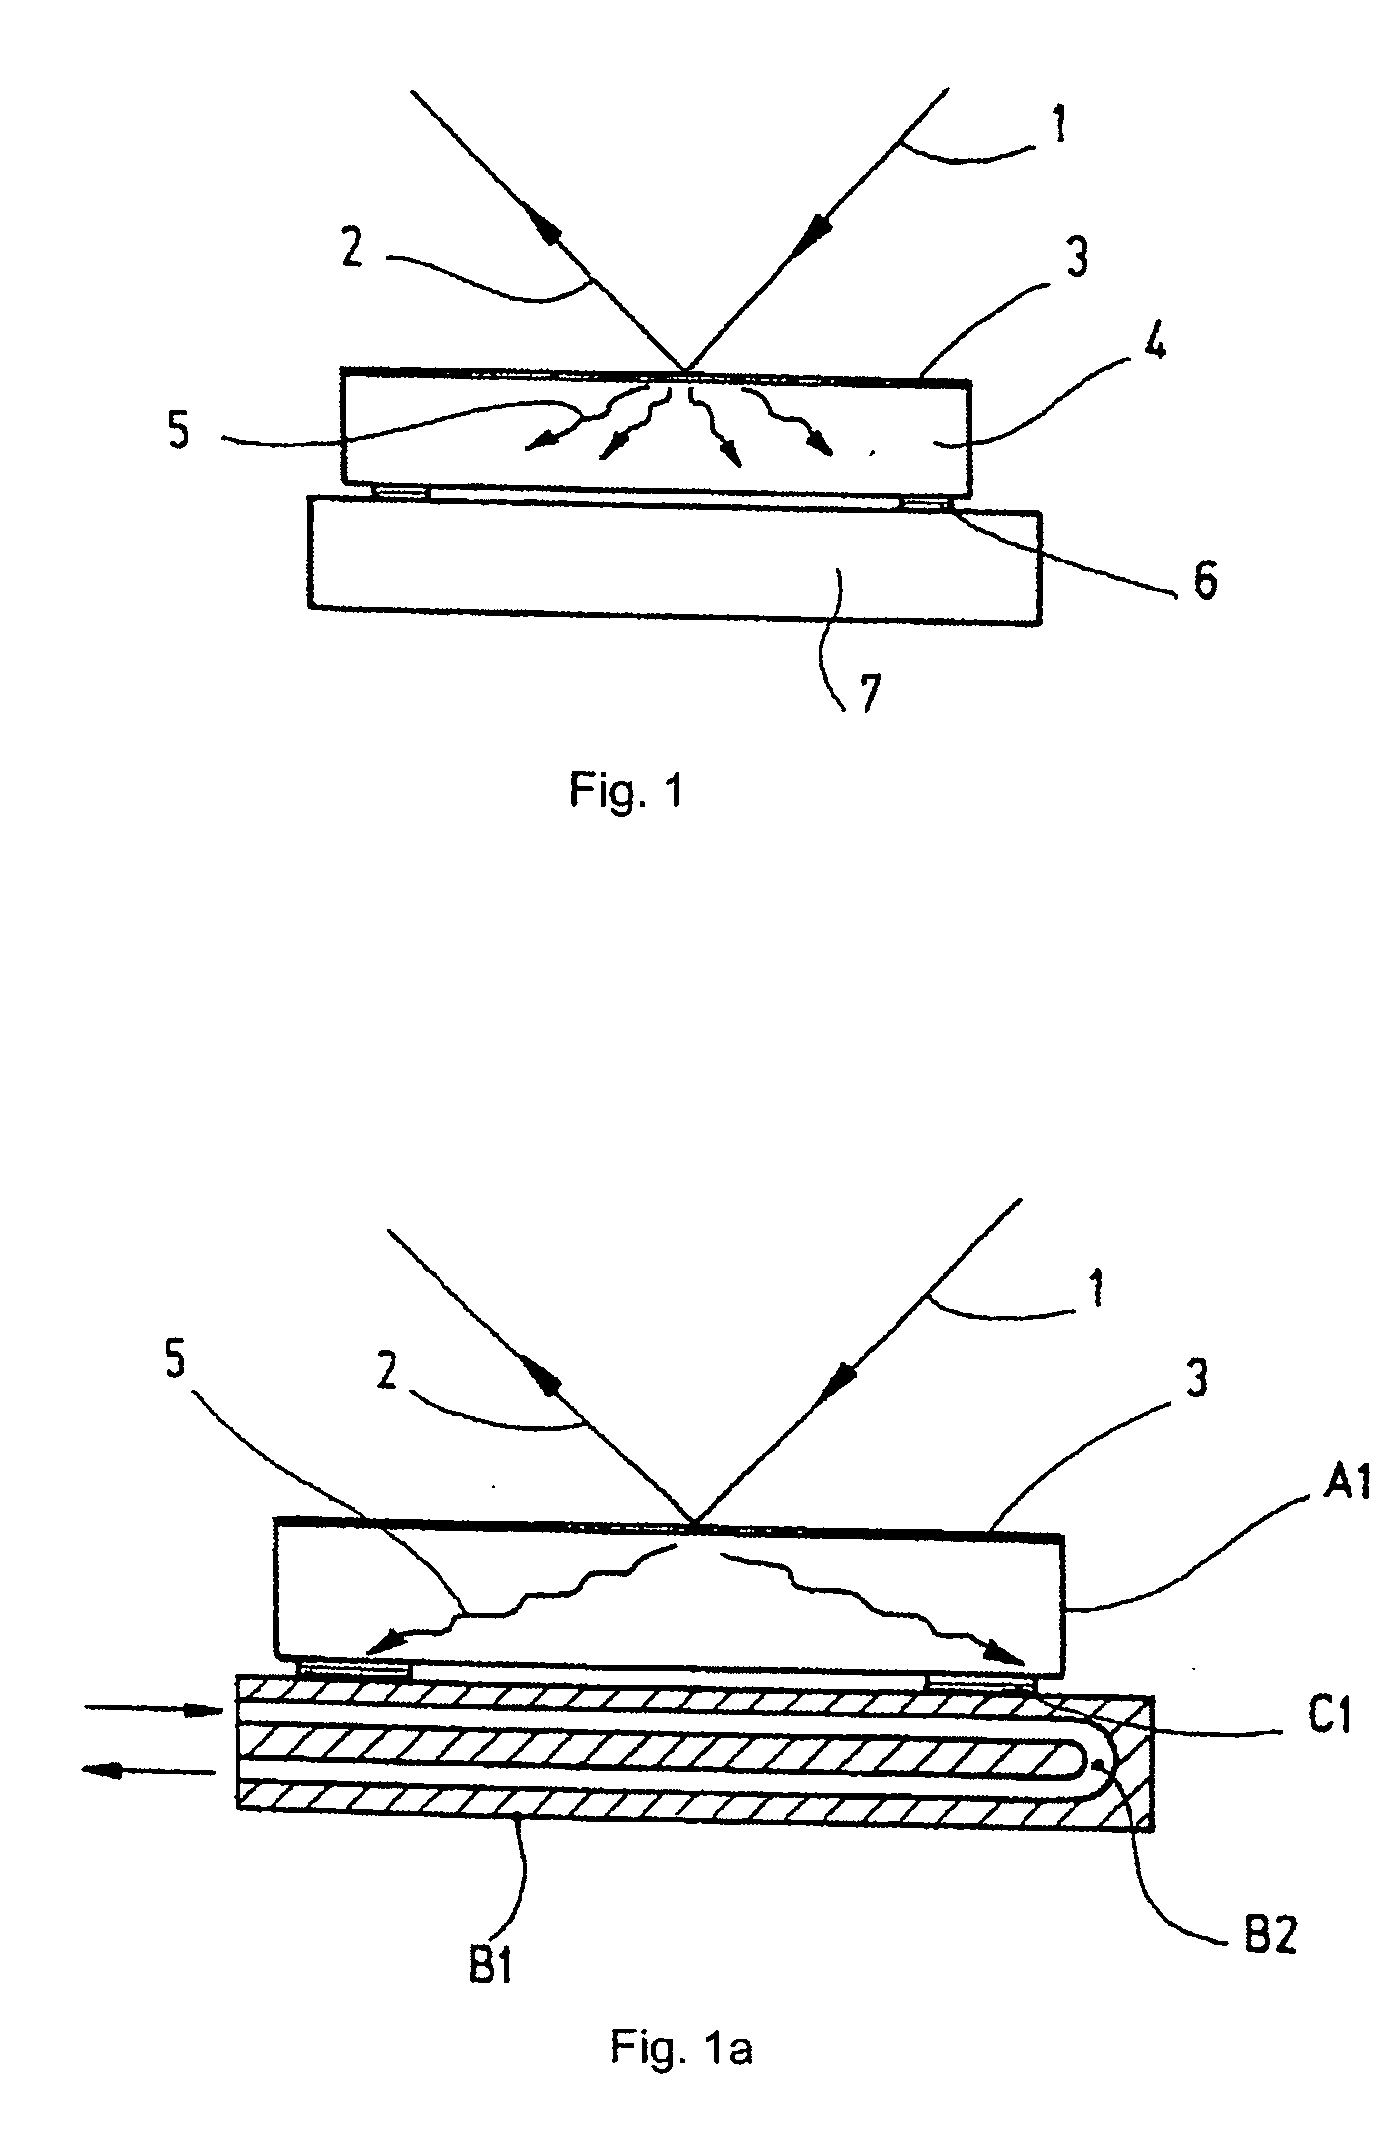 Optical component having an improved transient thermal behavior and method for improving the transient thermal behavior of an optical component